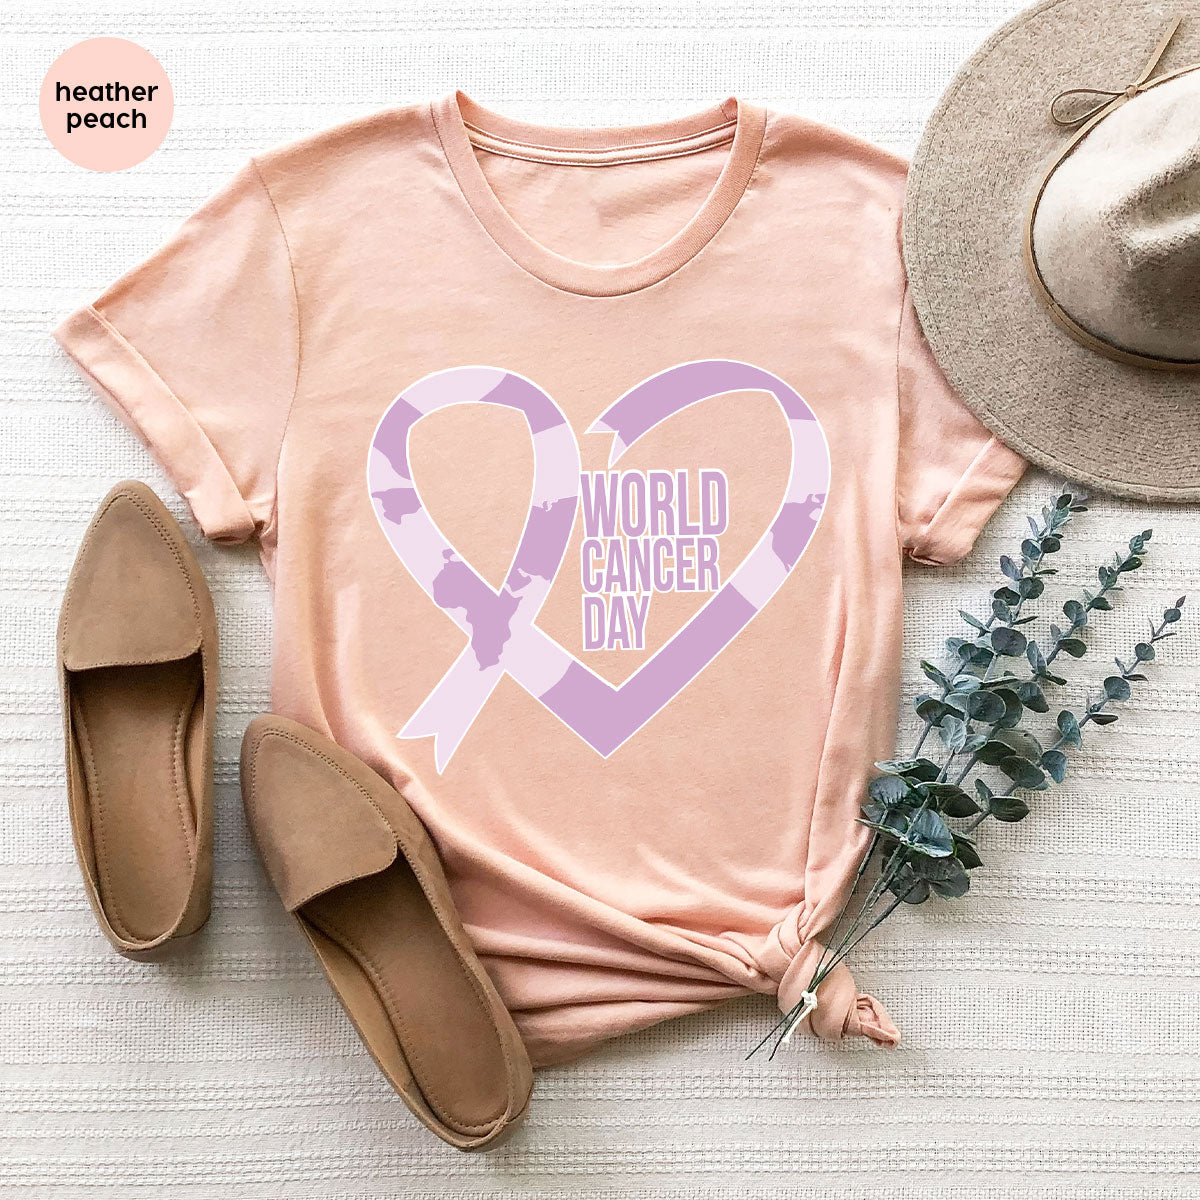 Funny Cancer Shirt, Cancer Awareness Tee, Breast Cancer TShirt, Cancer –